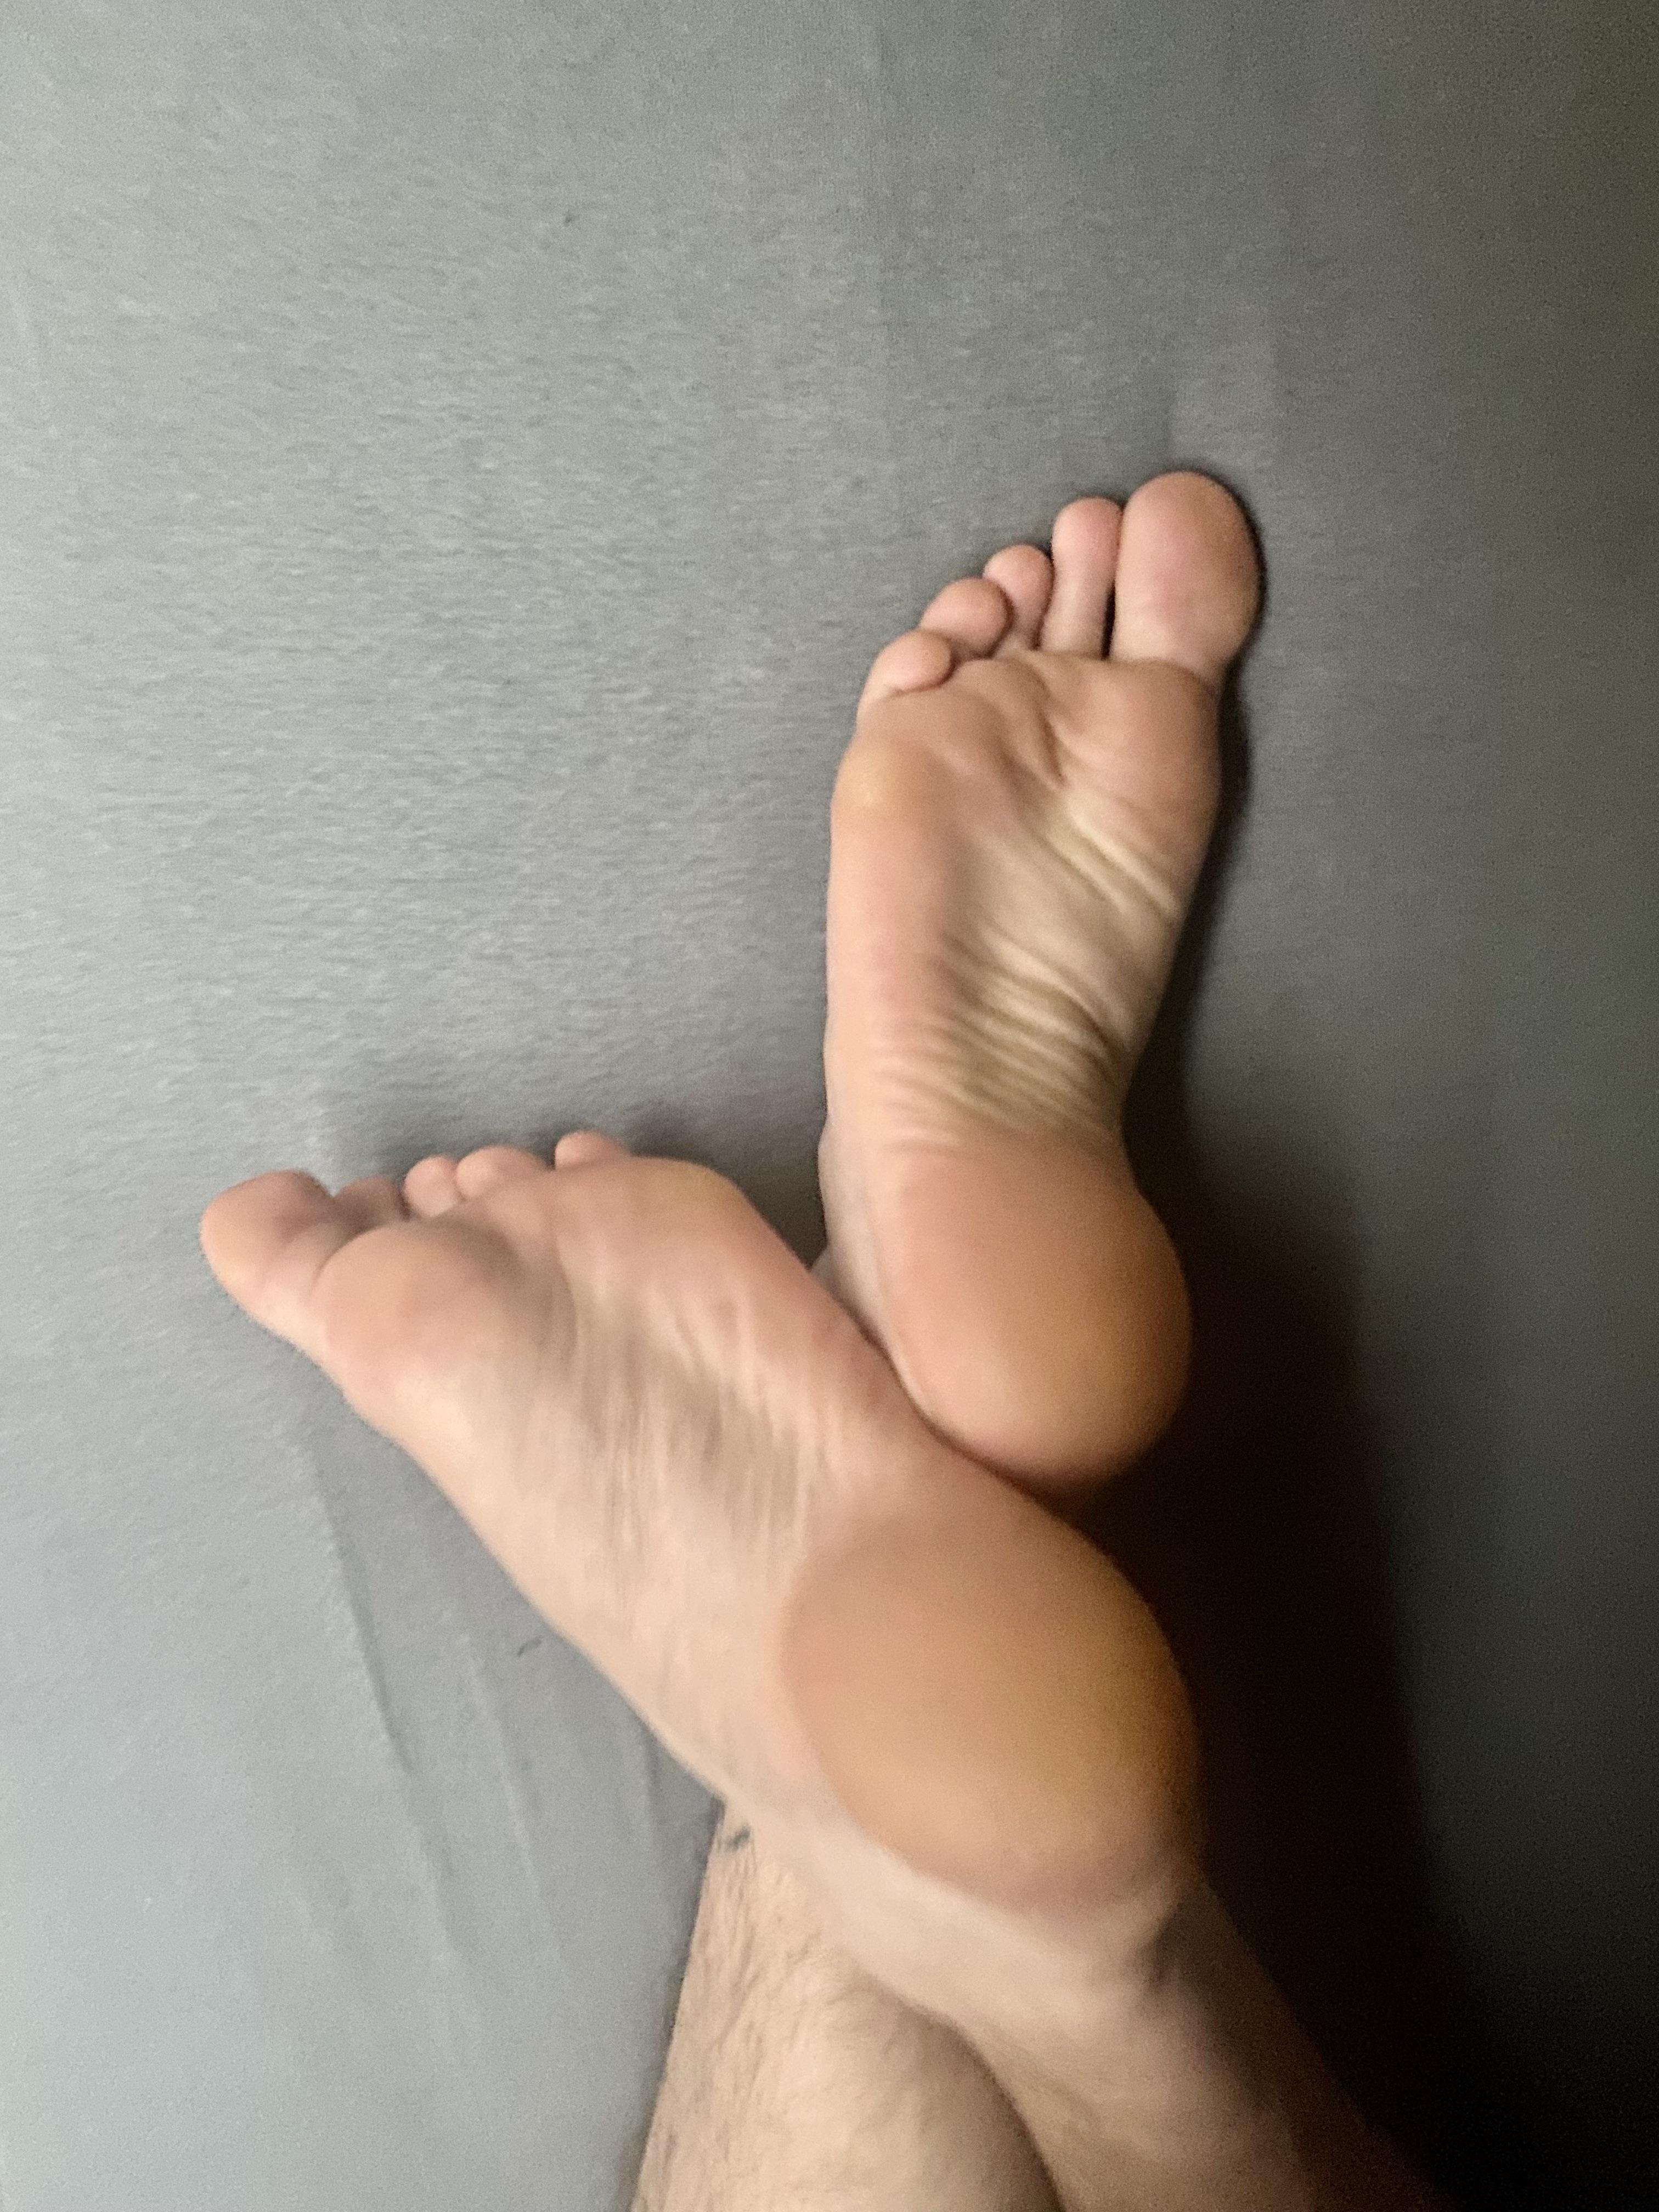 Male feet licked